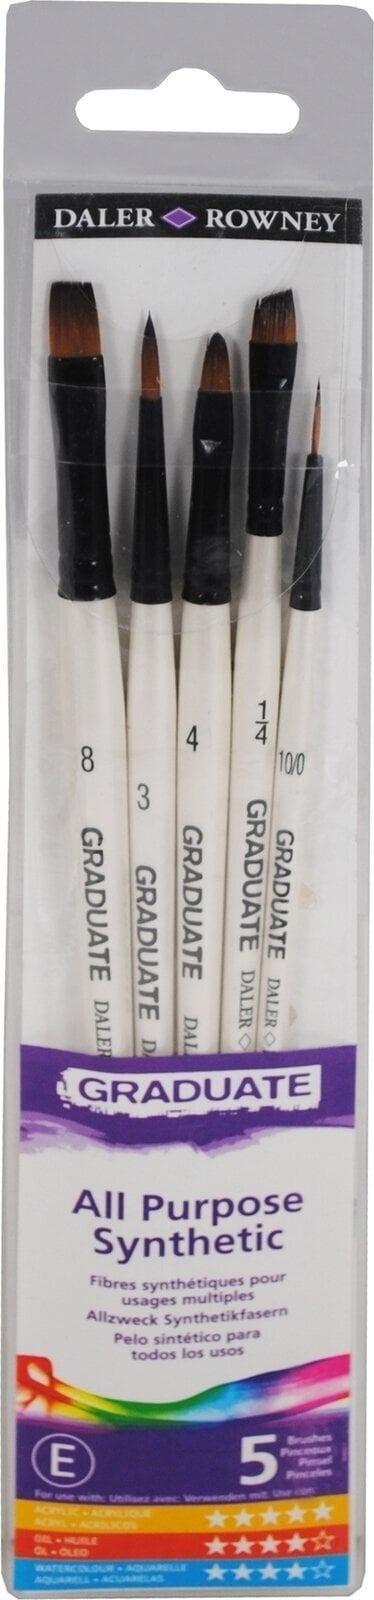 Pinsel Daler Rowney Graduate Multi-Technique Brush Synthetic Pinselset 1 Stck